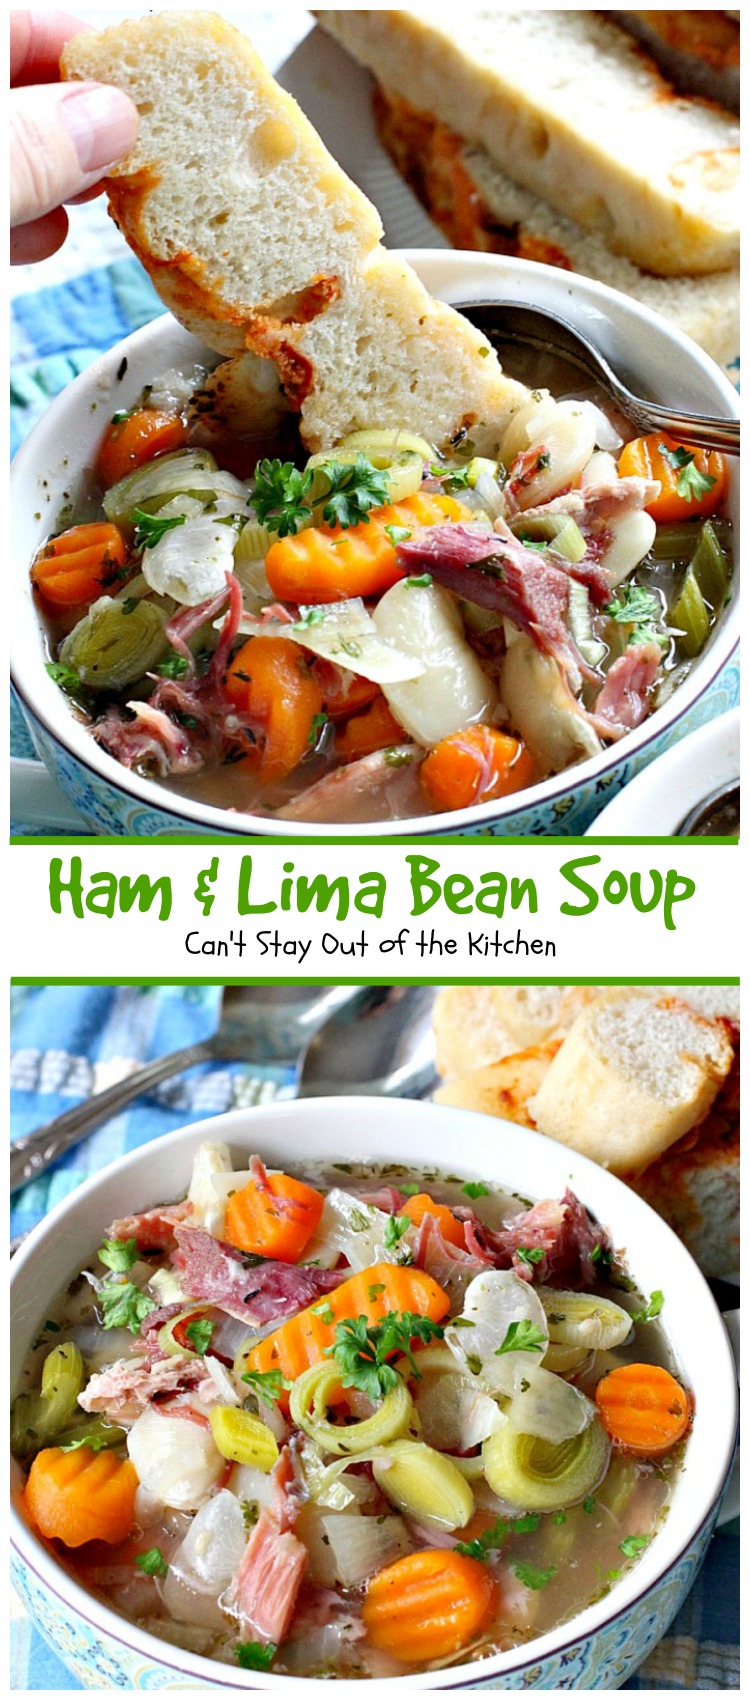 Ham & Lima Bean Soup | Can't Stay Out of the Kitchen